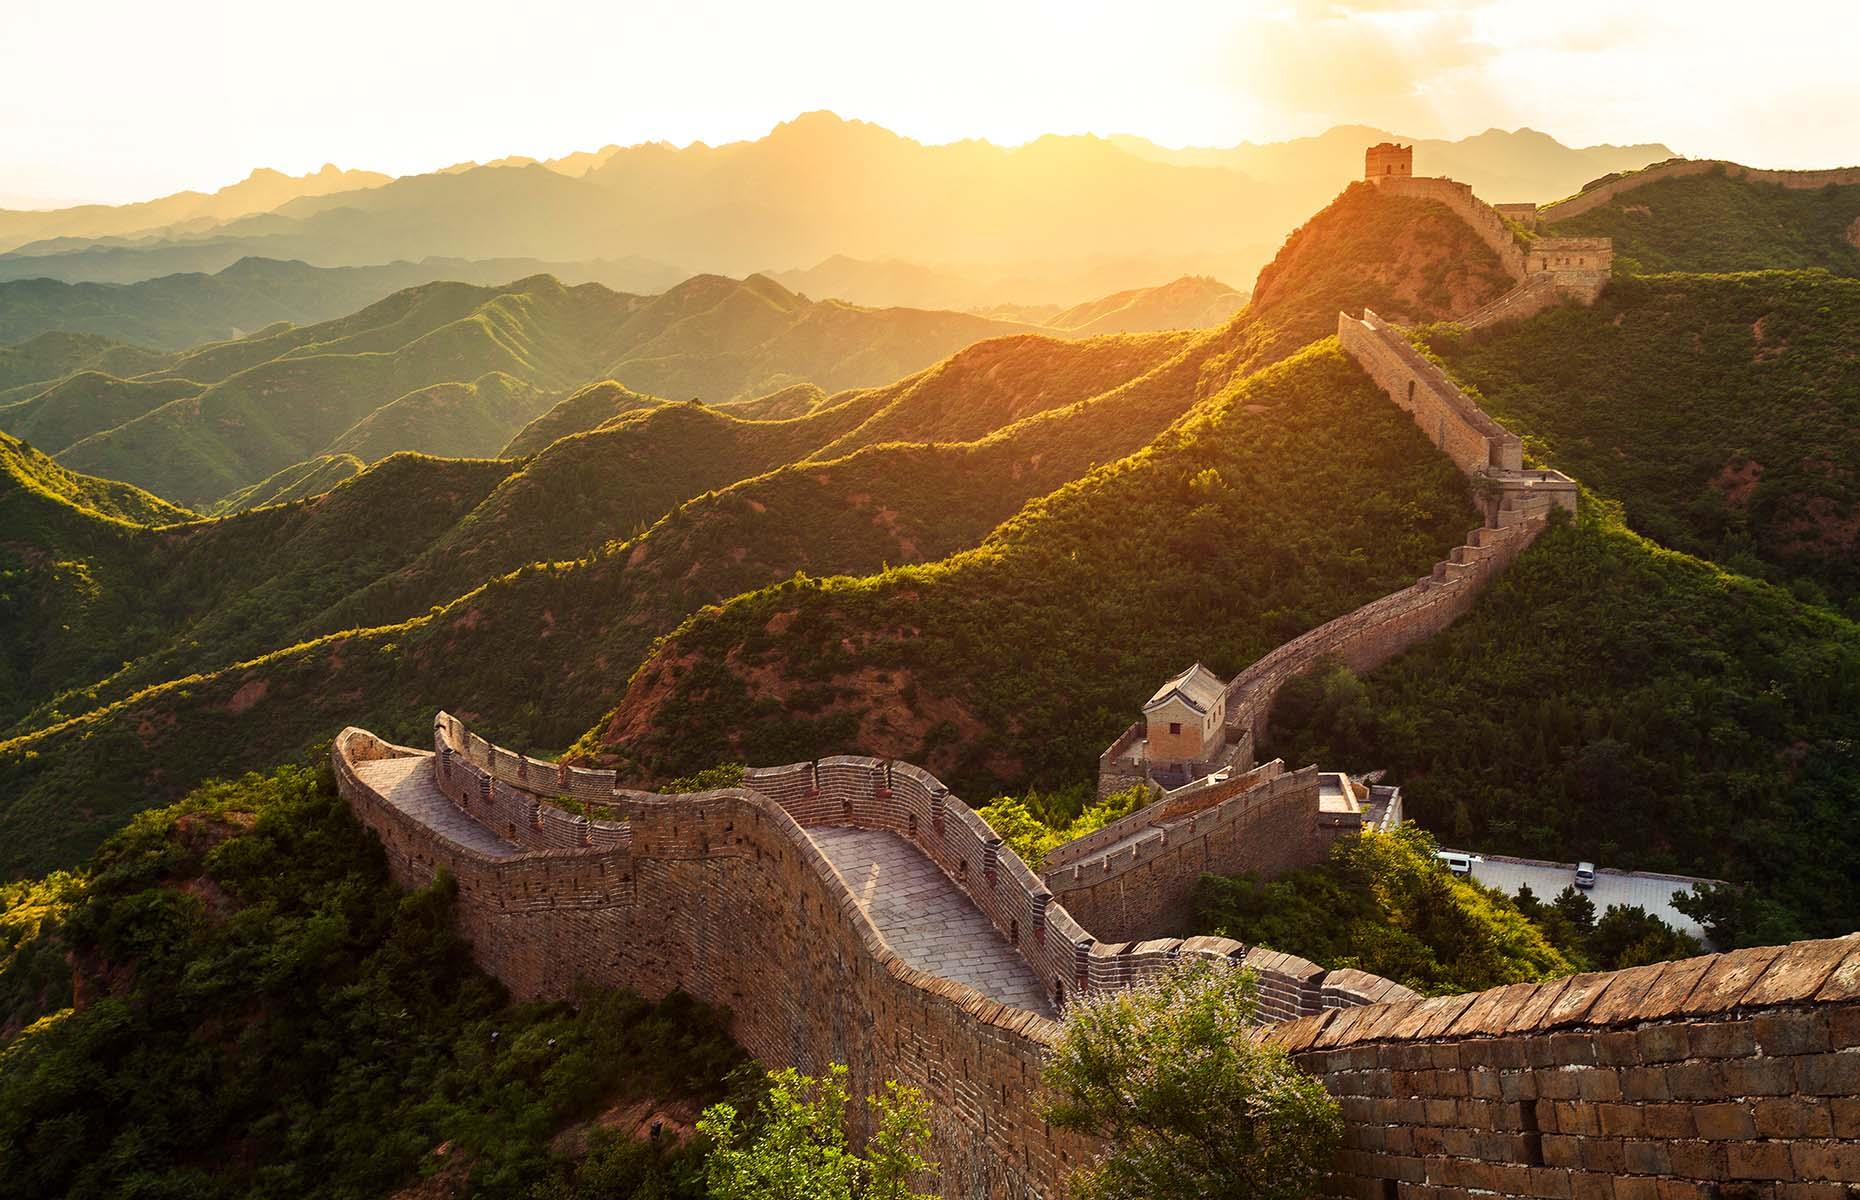 <p>Famously visible from space, many regard the Great Wall of China as one of the world’s greatest marvels. It's over 2,000 years old and snakes its way across 23 degrees of latitude. It's also very popular: more than 10 million people visit on average each year, with the Badaling section closest to Beijing receiving up to 100,000 visitors a day. Reviewers have suggested that the tour groups here can get unruly, leading to a low score of 5.05 for one of the world’s wonders.</p>